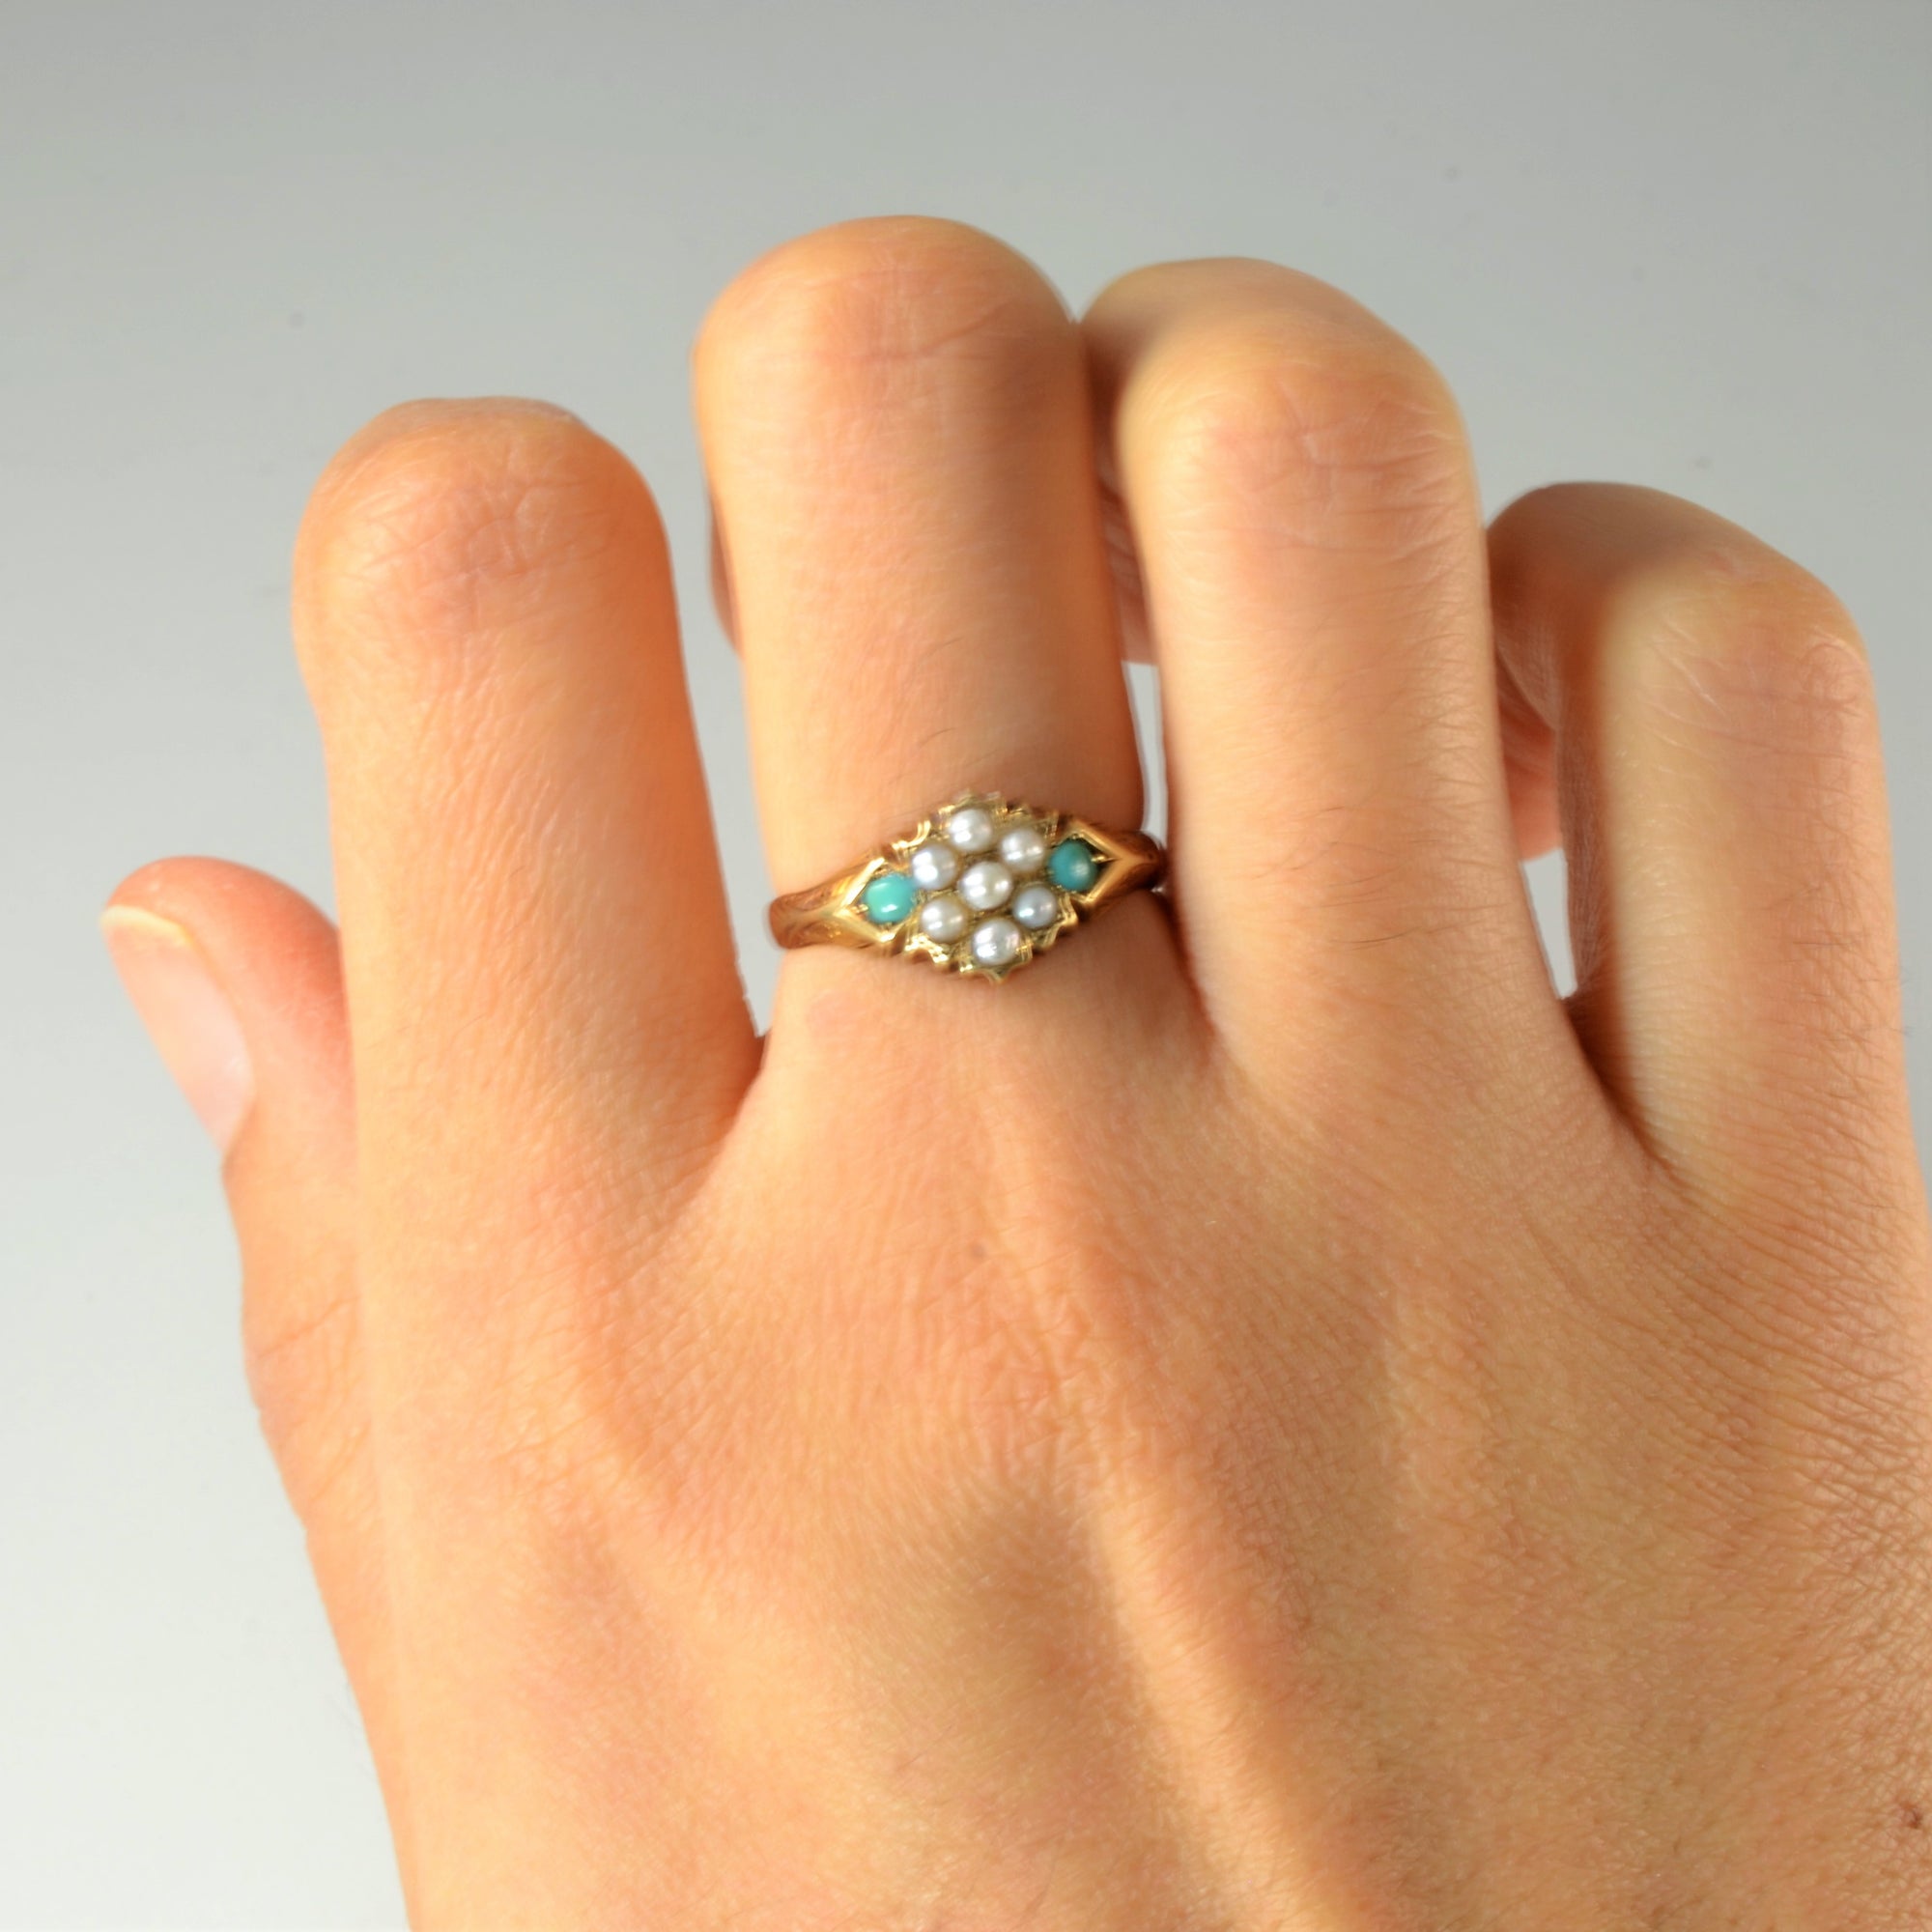 Victorian Era Turquoise & Seed Pearl Ring | 0.16ctw | SZ 6.5 |